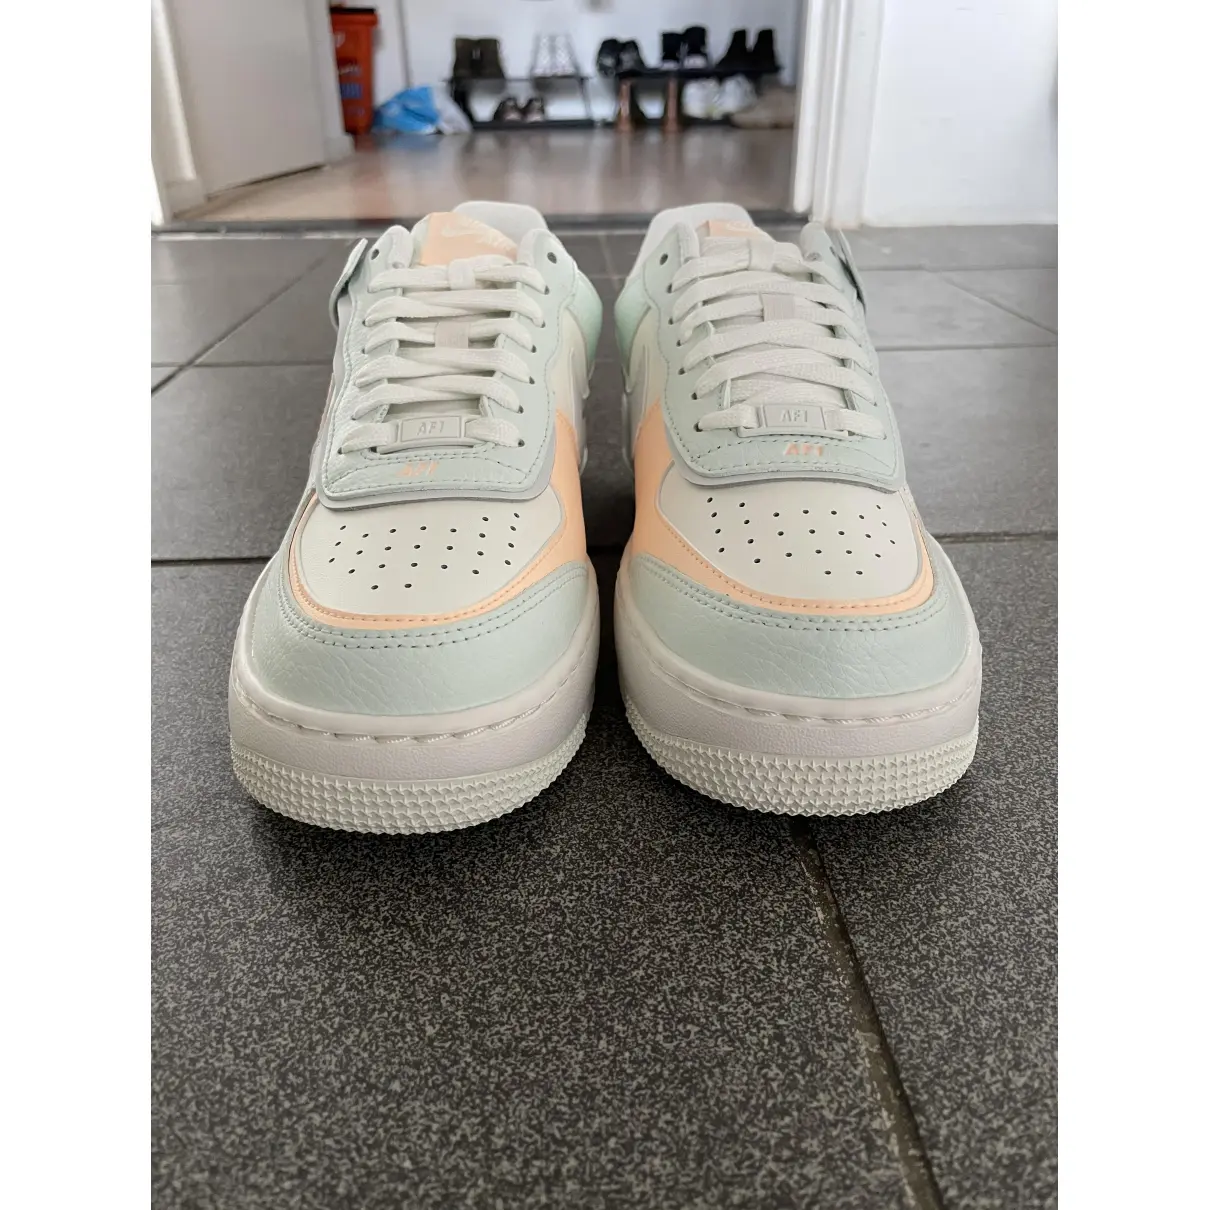 Buy Nike Air Force 1 leather trainers online